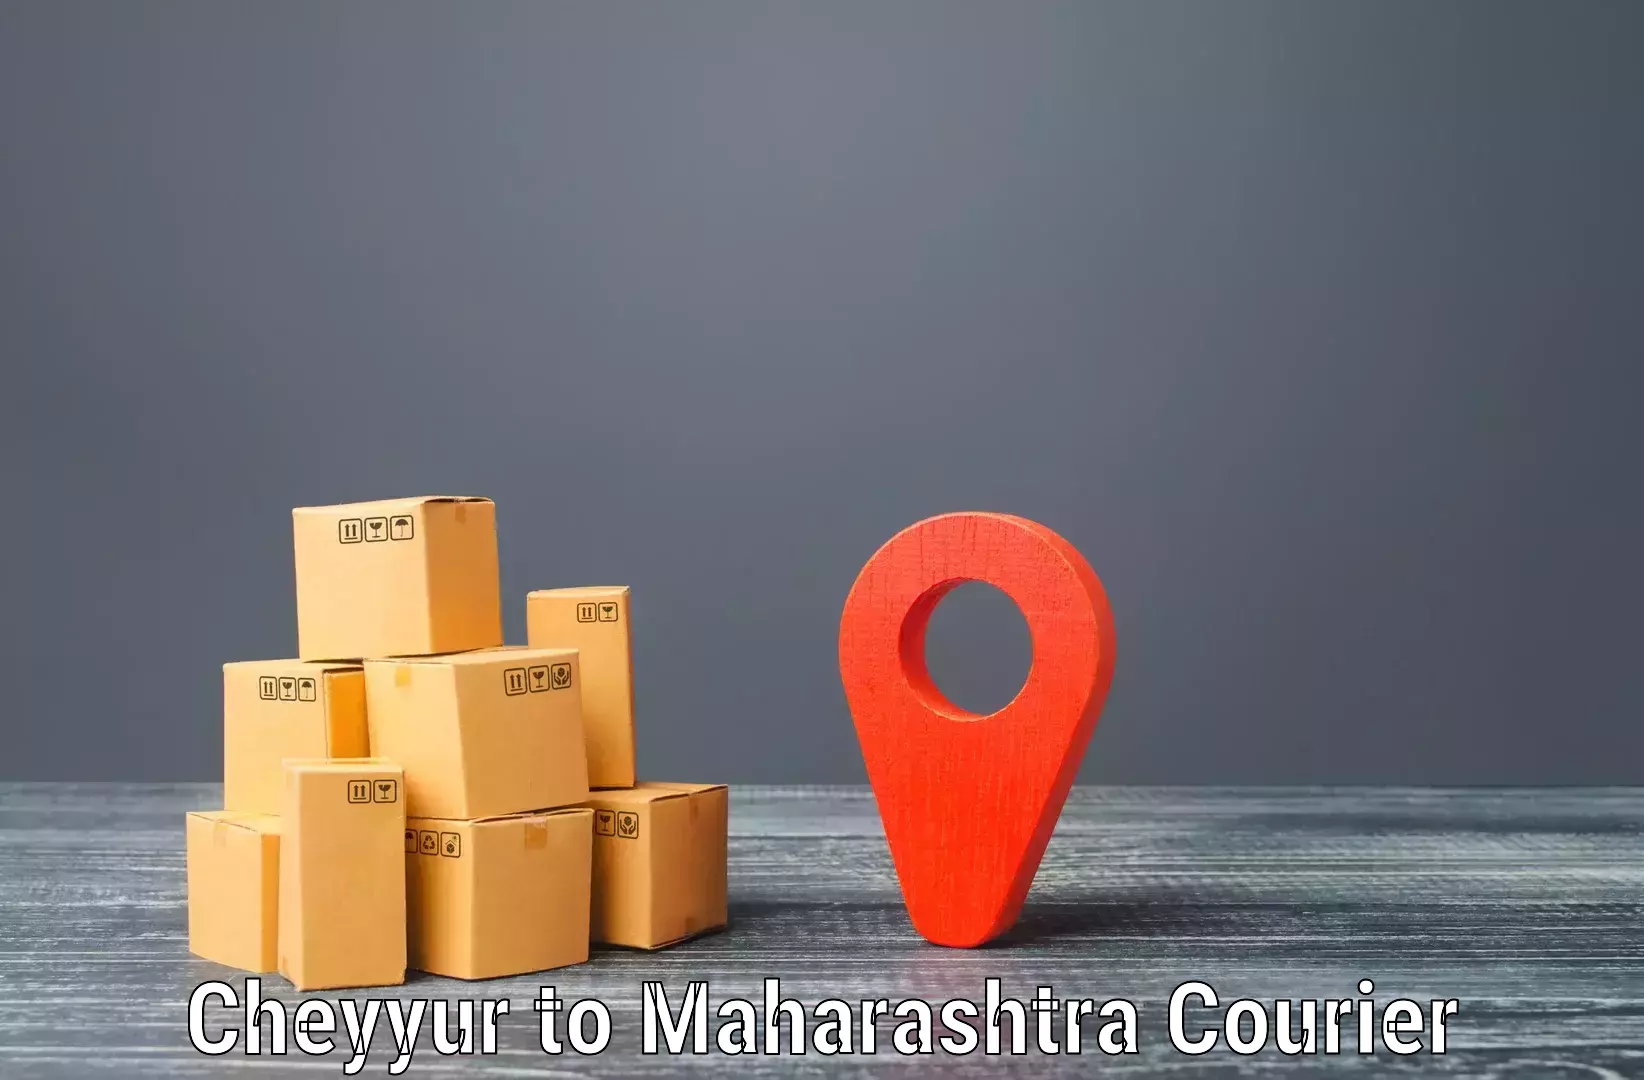 Reliable shipping partners Cheyyur to Dadar